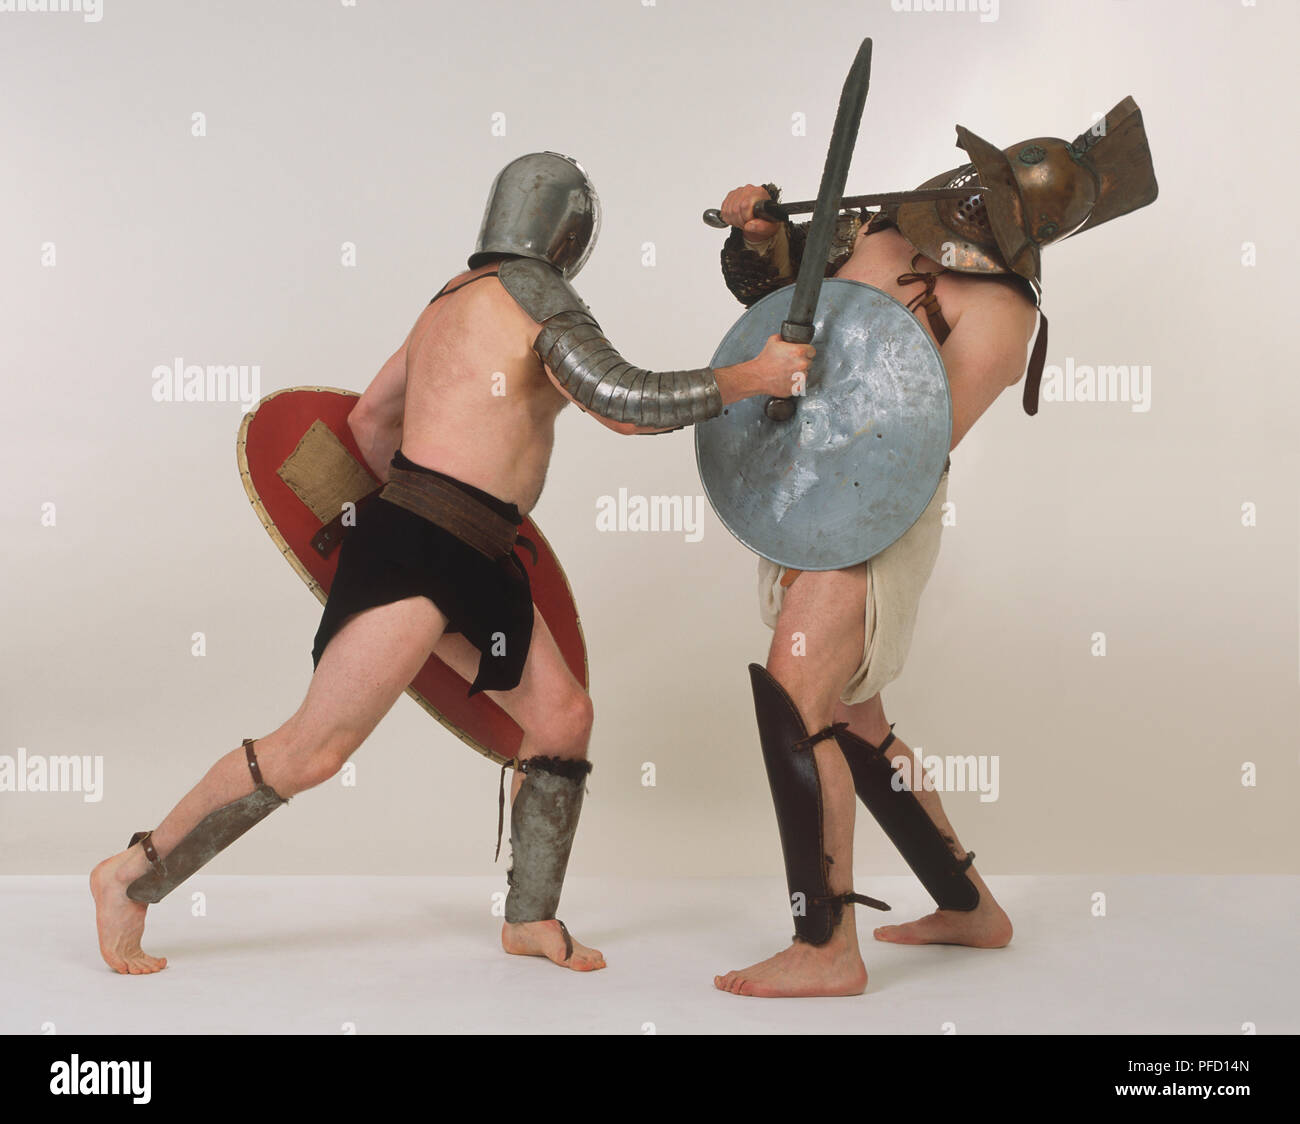 Gladiator attacking opponent with a sword, both men holding shields and wearing protective helmets, side view. Stock Photo